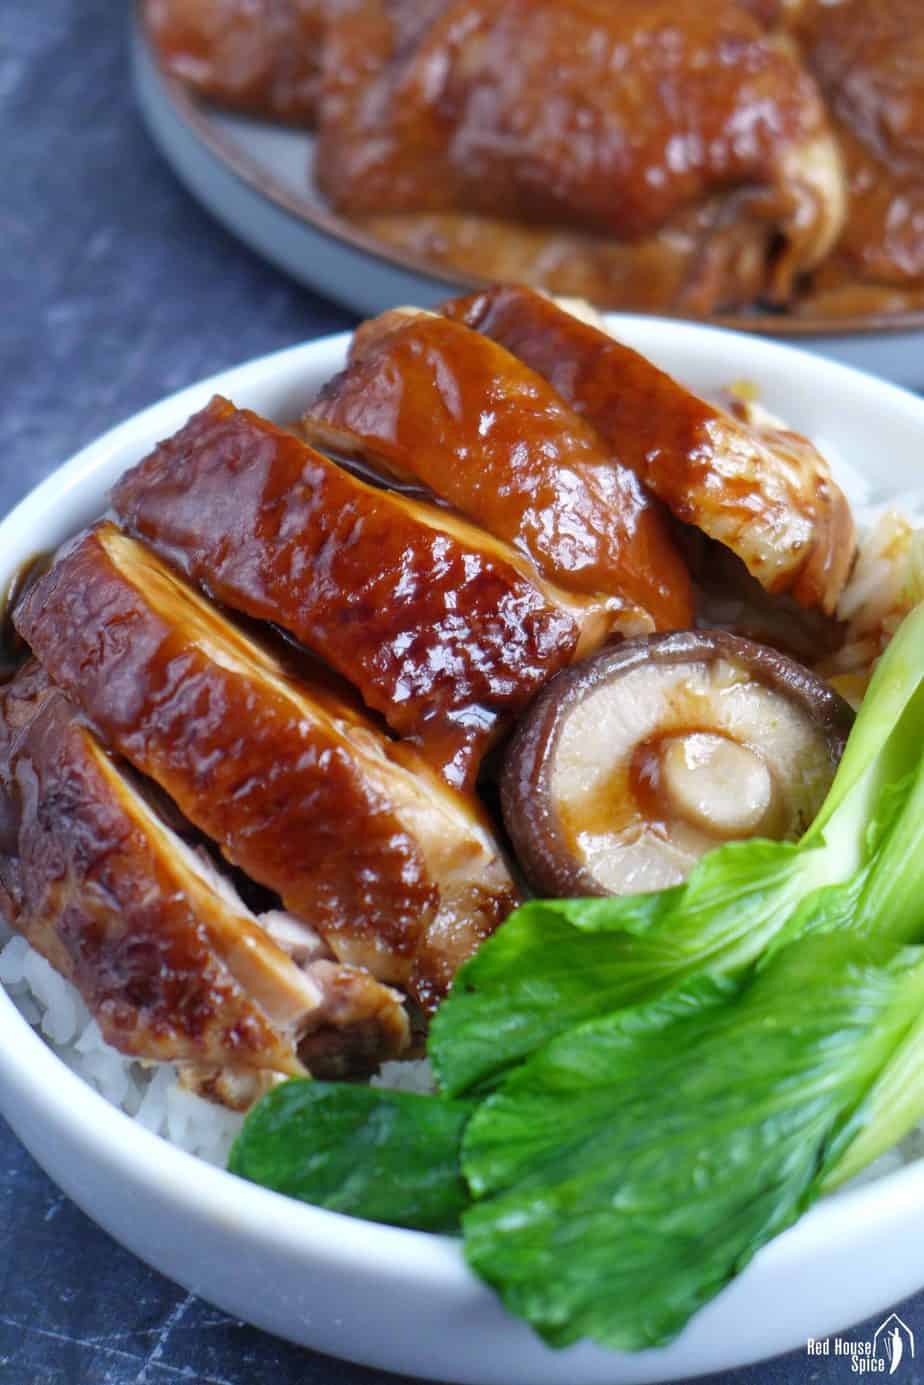 Soy sauce slices in a rice bowl